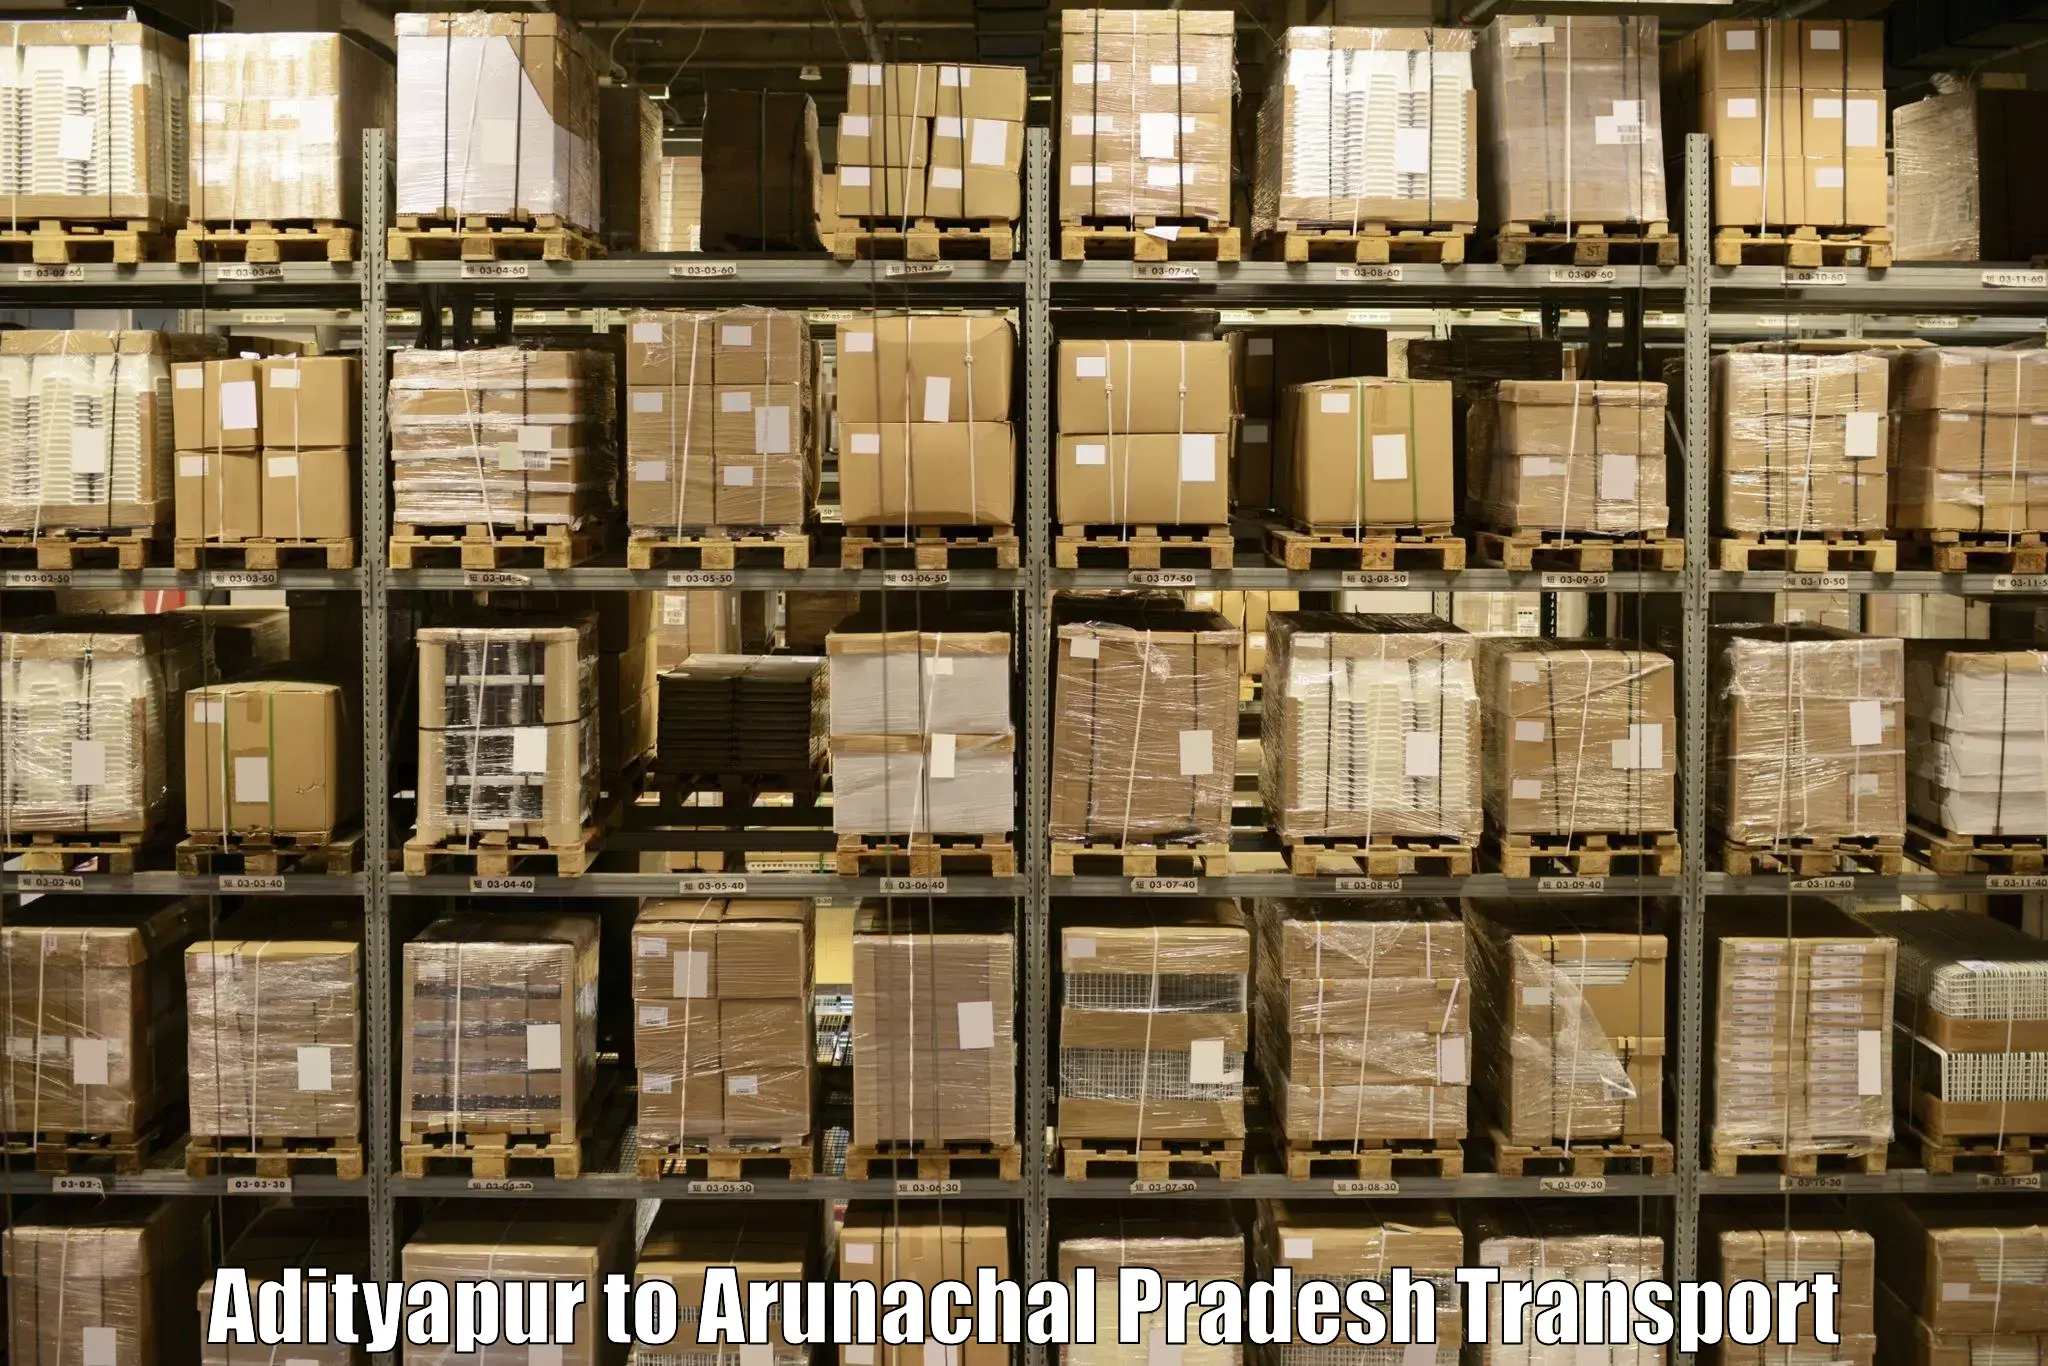 Truck transport companies in India in Adityapur to Lower Dibang Valley